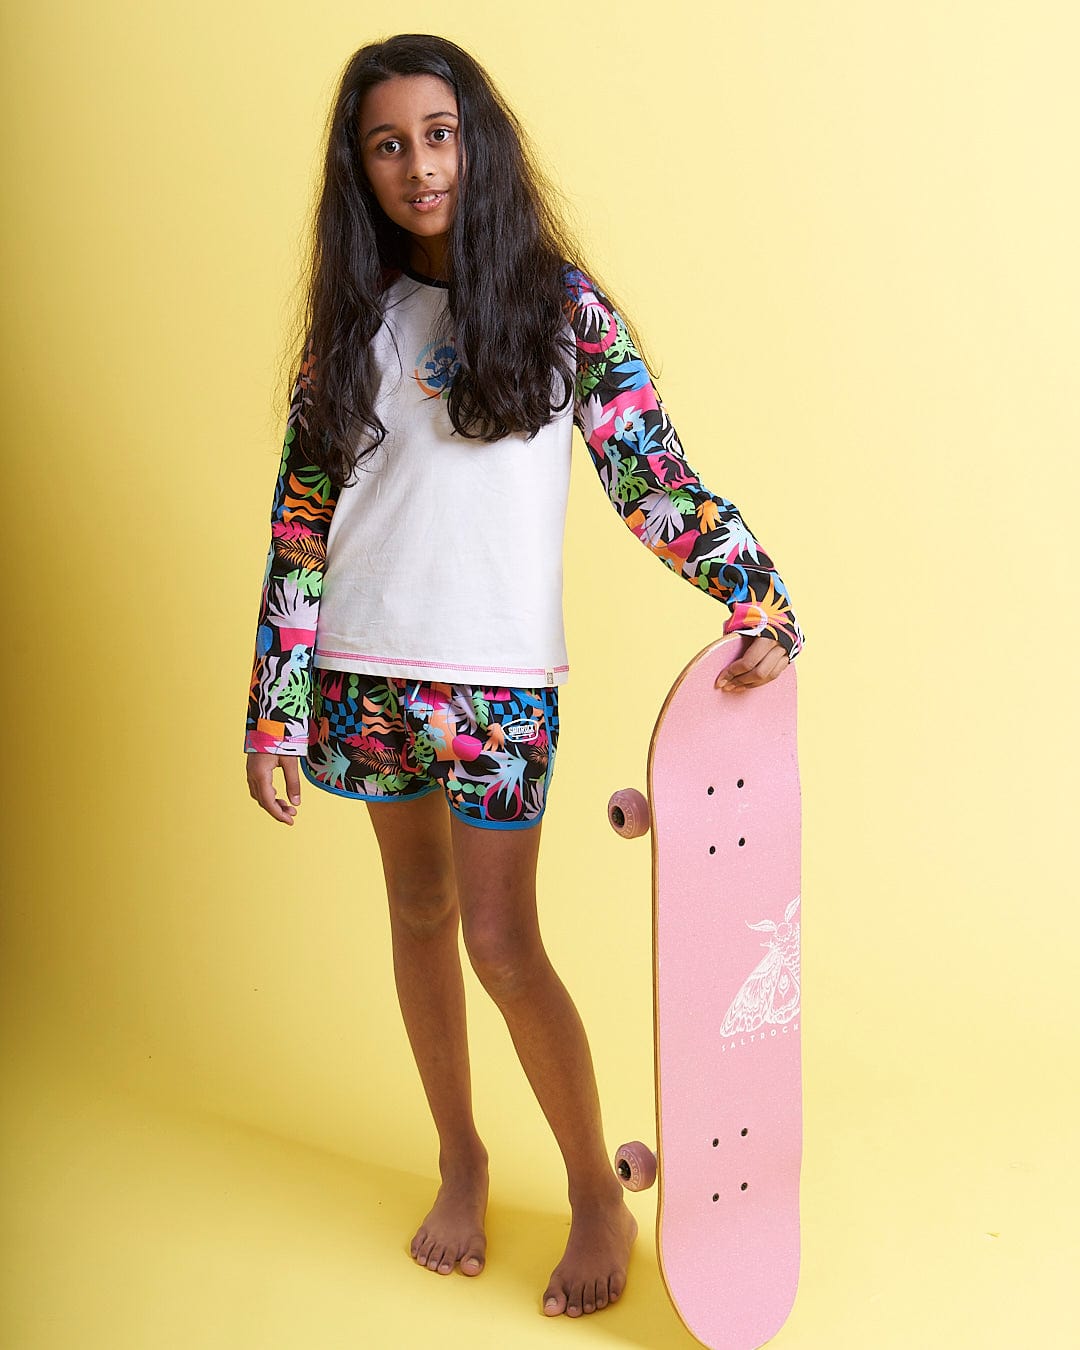 A girl holding a Saltrock Zephyr - Kids Boardshort - Blue skateboard in front of a yellow background.